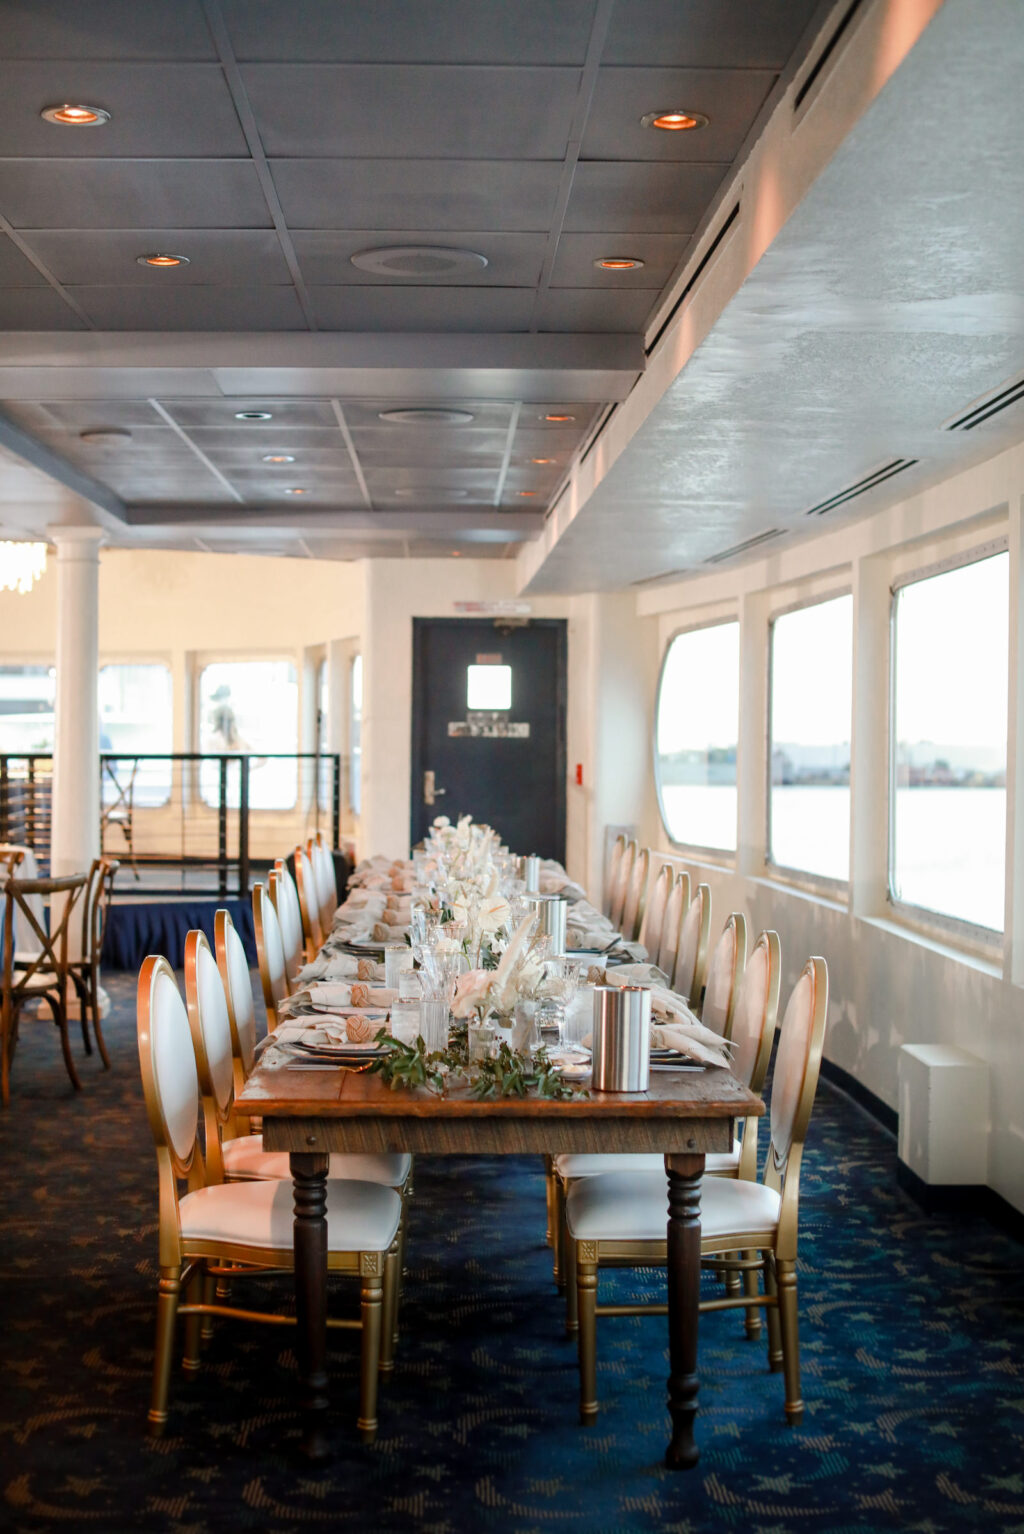 Romantic Nautical Coastal Reception with Long Wooden Farm Table, King Louis Chairs and Low Centerpieces | Downtown Tampa Wedding Venue Yacht Starship | Kate Ryan Event Rentals